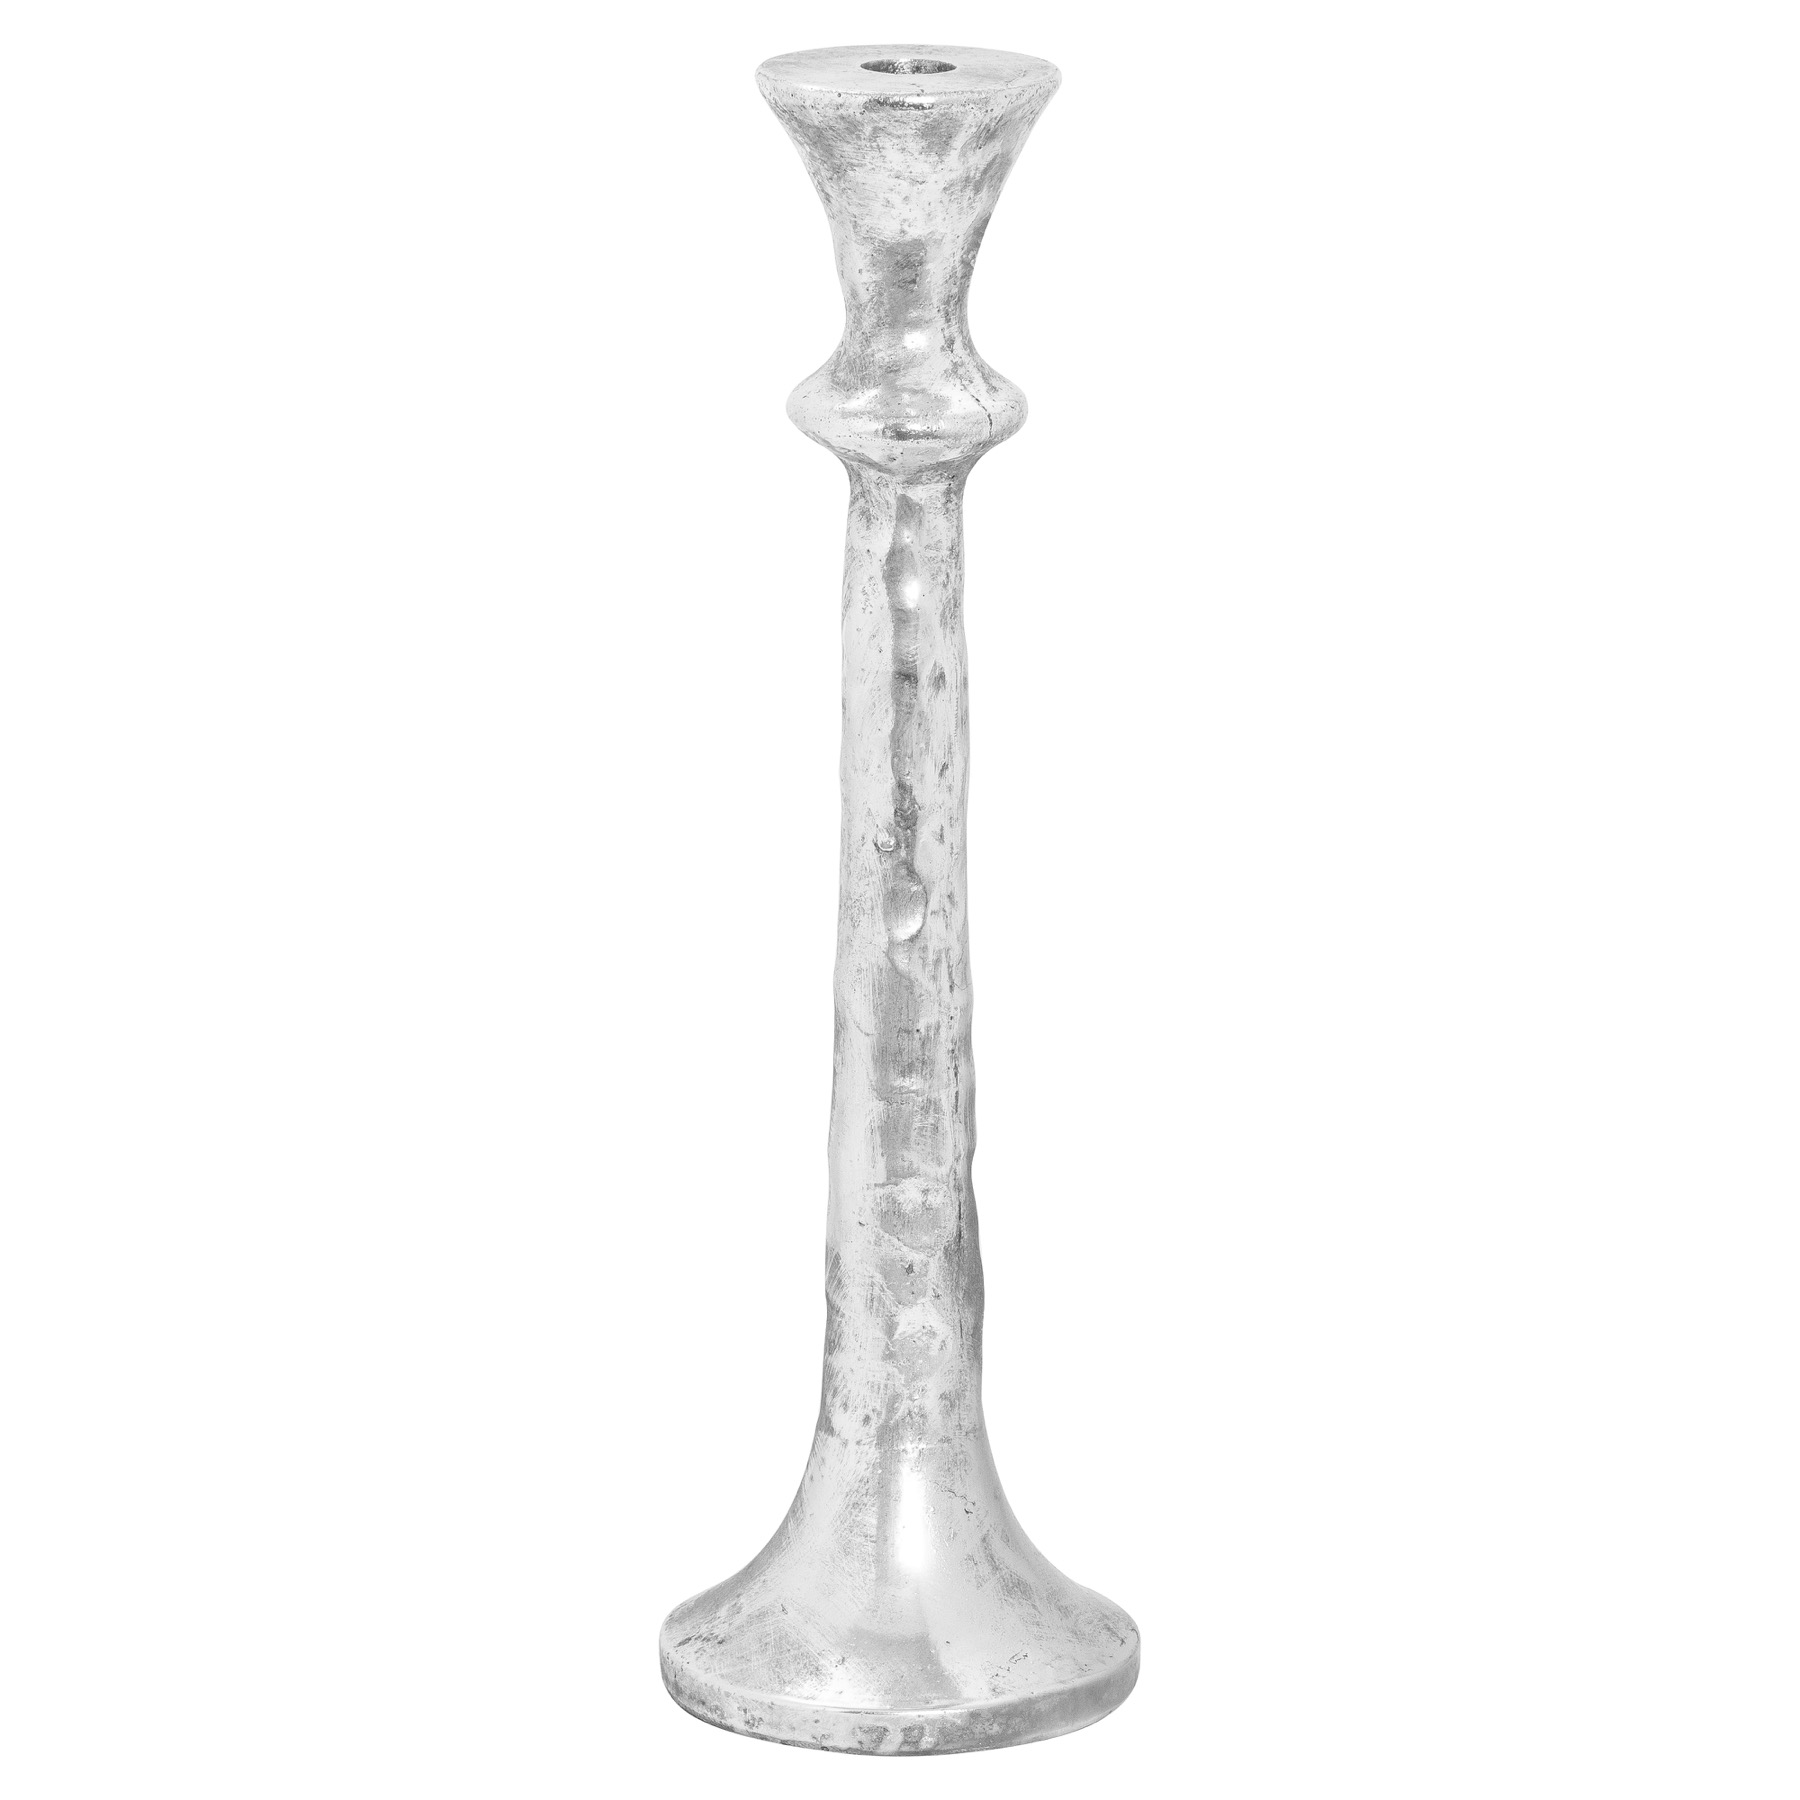 Silver Ceramic Large Collared Candle Holder - Image 1